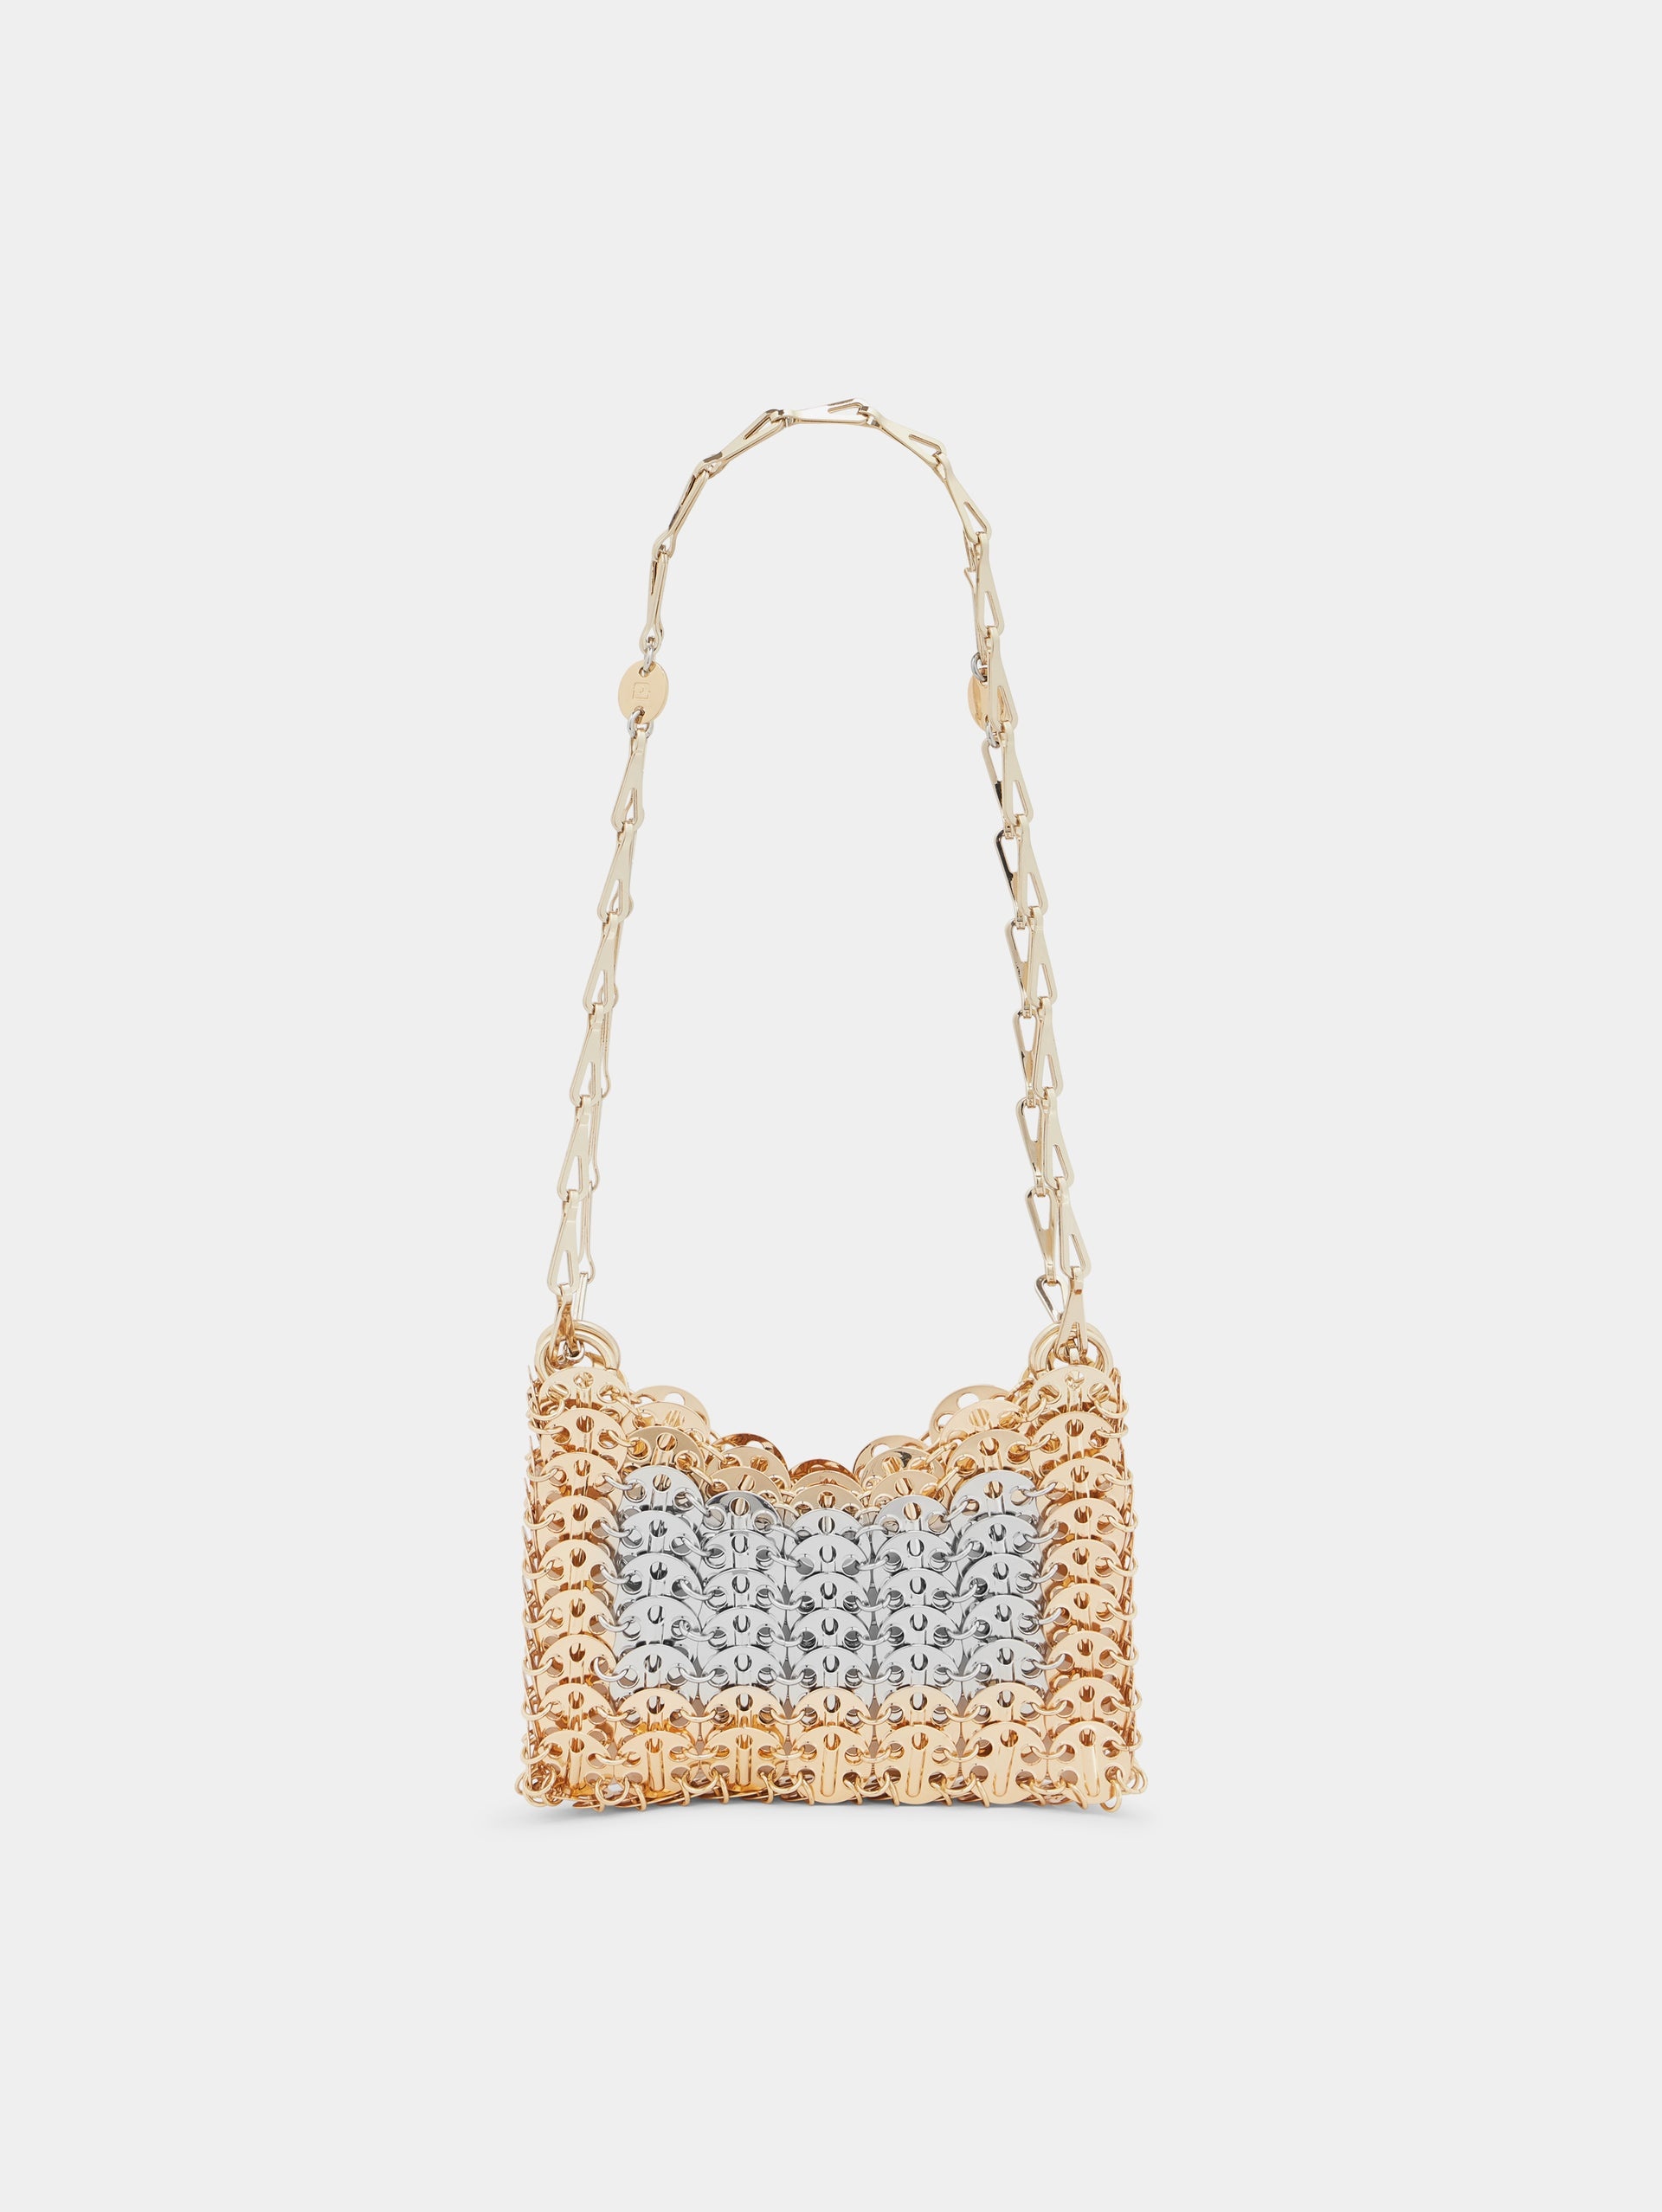 ICONIC GOLD AND SILVER NANO 1969 BAG - 1